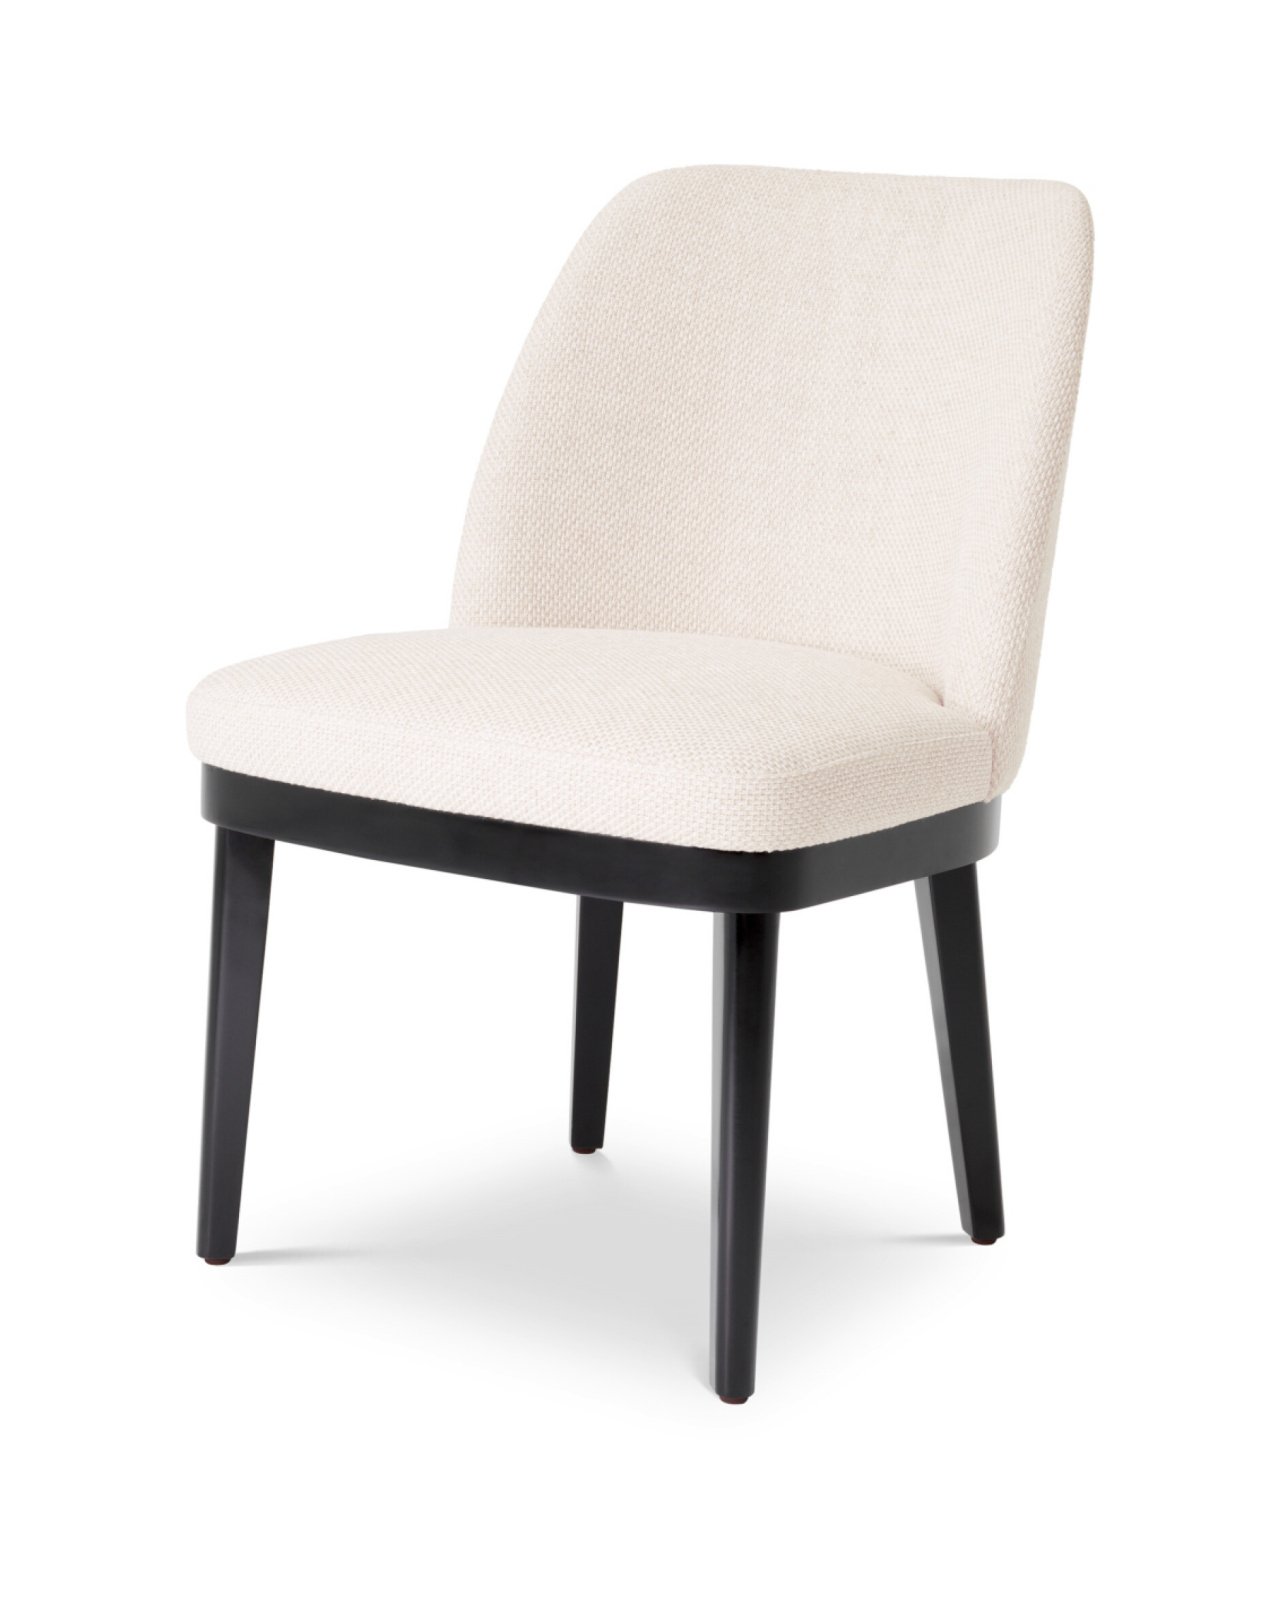 Costa Dining Chair Pausa Natural